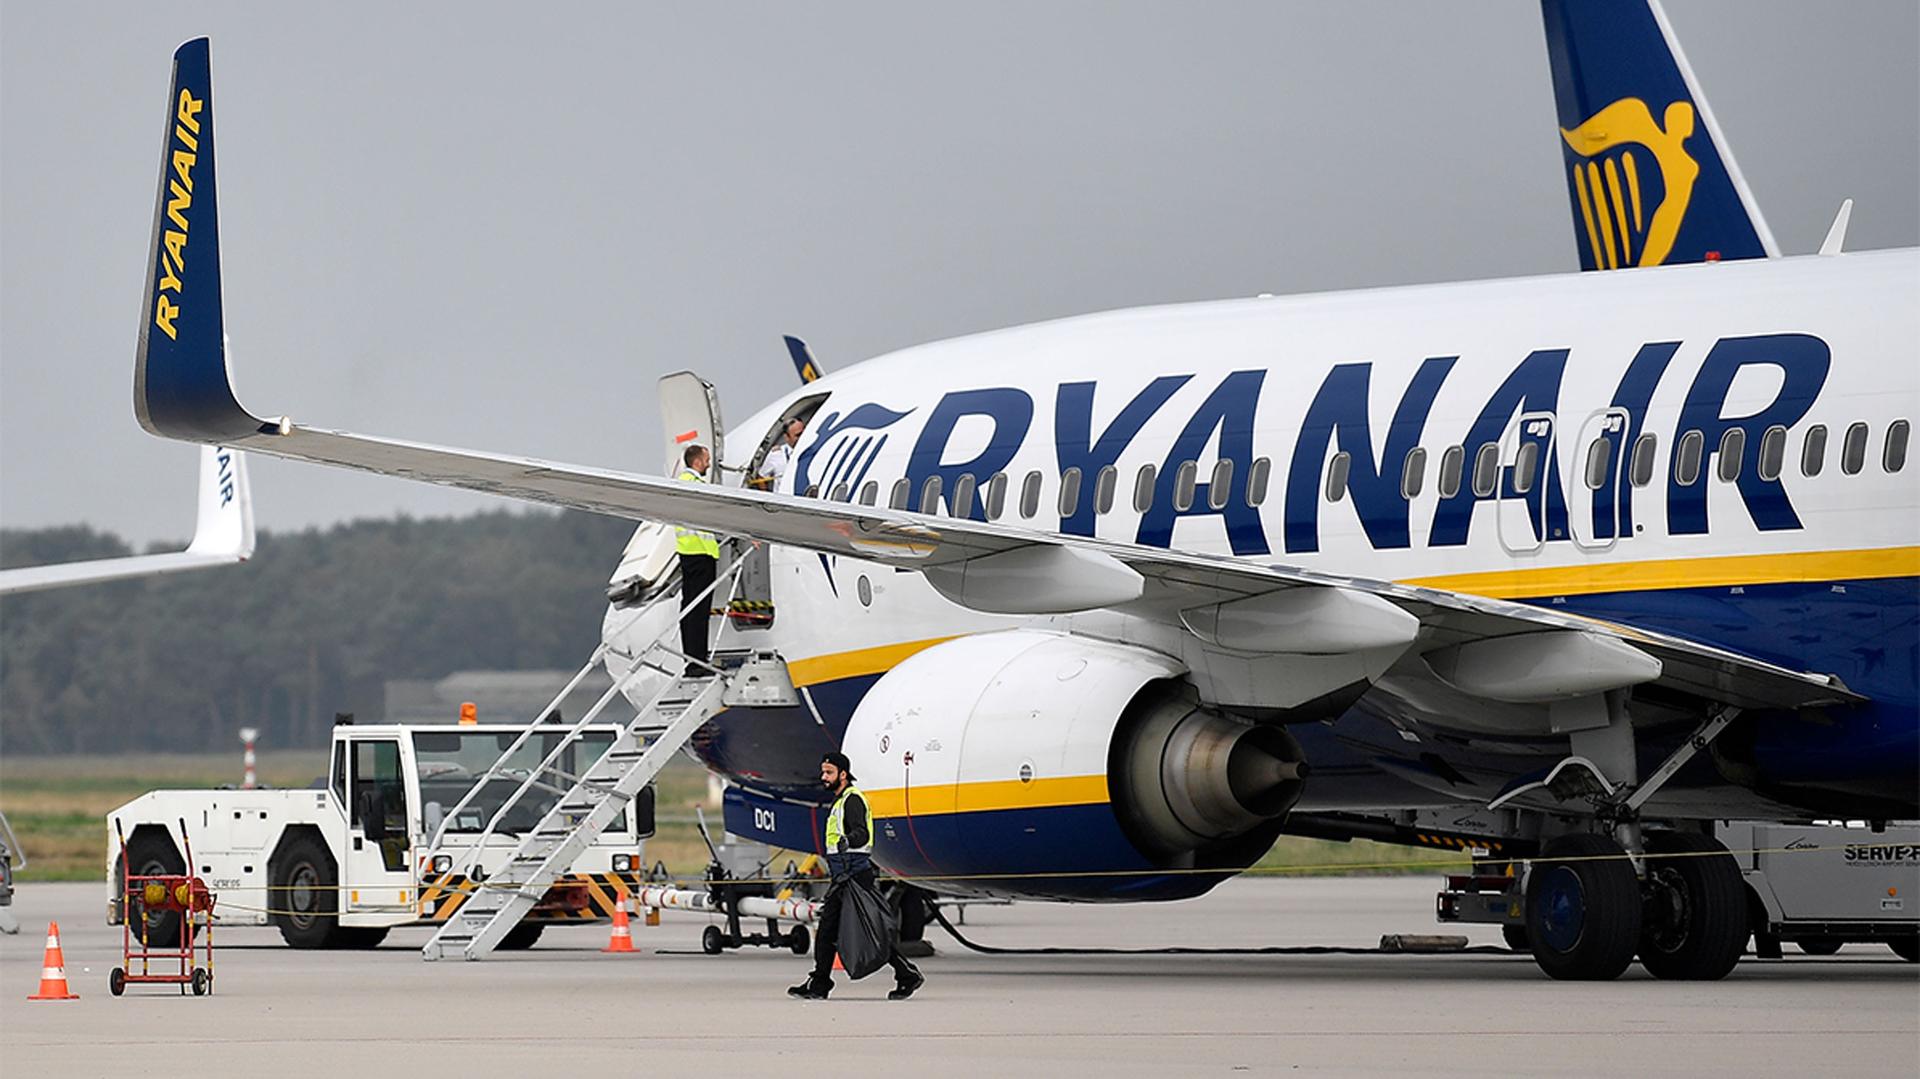 A Ryanair plane parks at the airport in Weeze, Germany